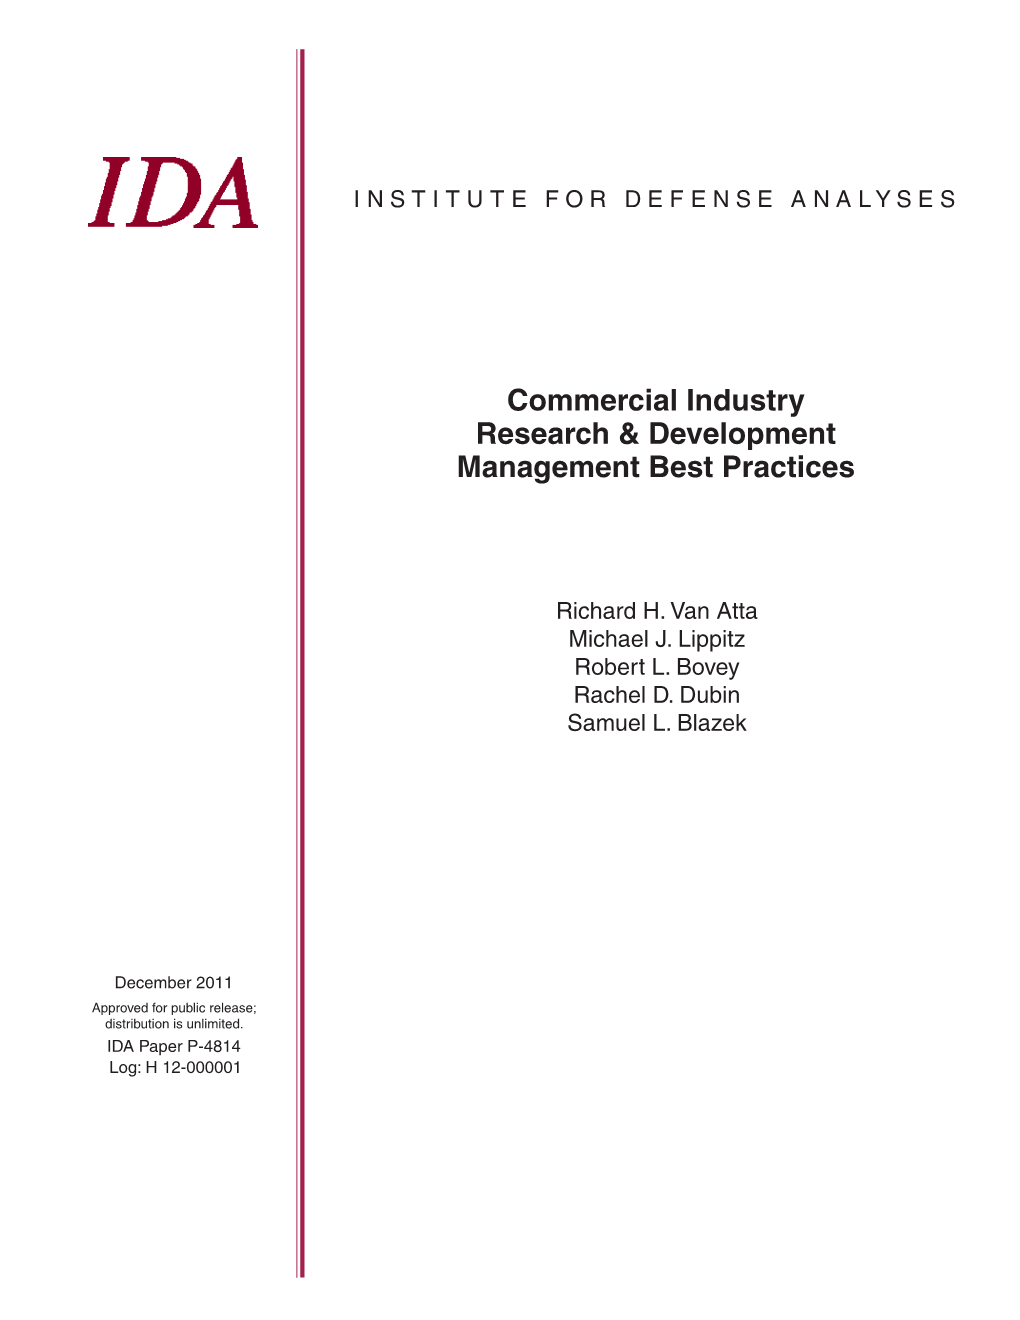 Commercial Industry Research and Development Management Best